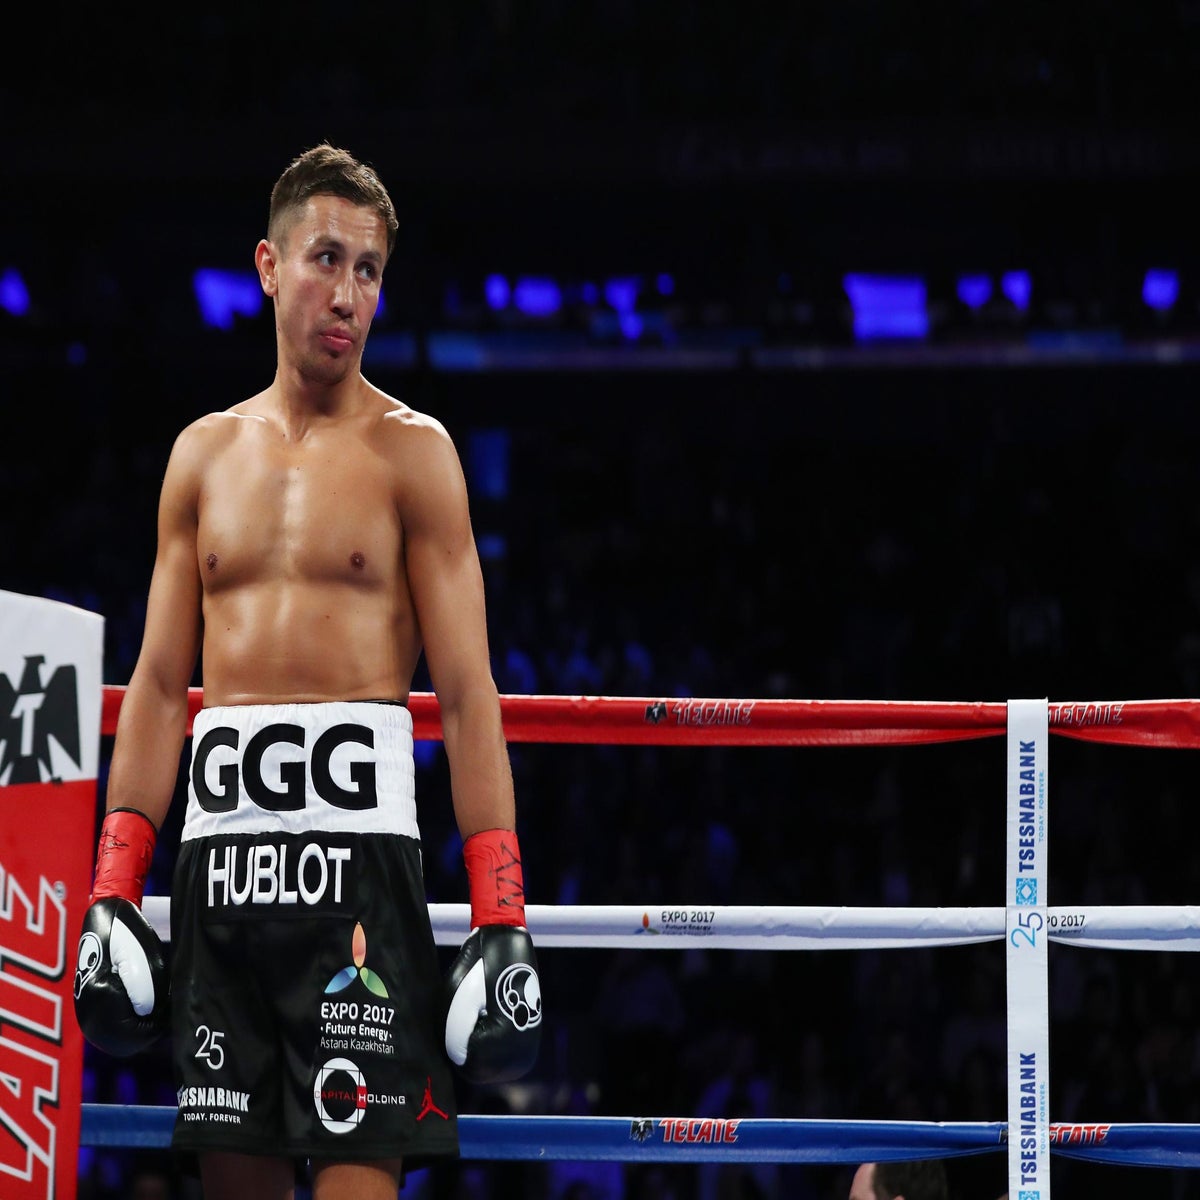 How Madison Square Garden continues its reign atop boxing - The